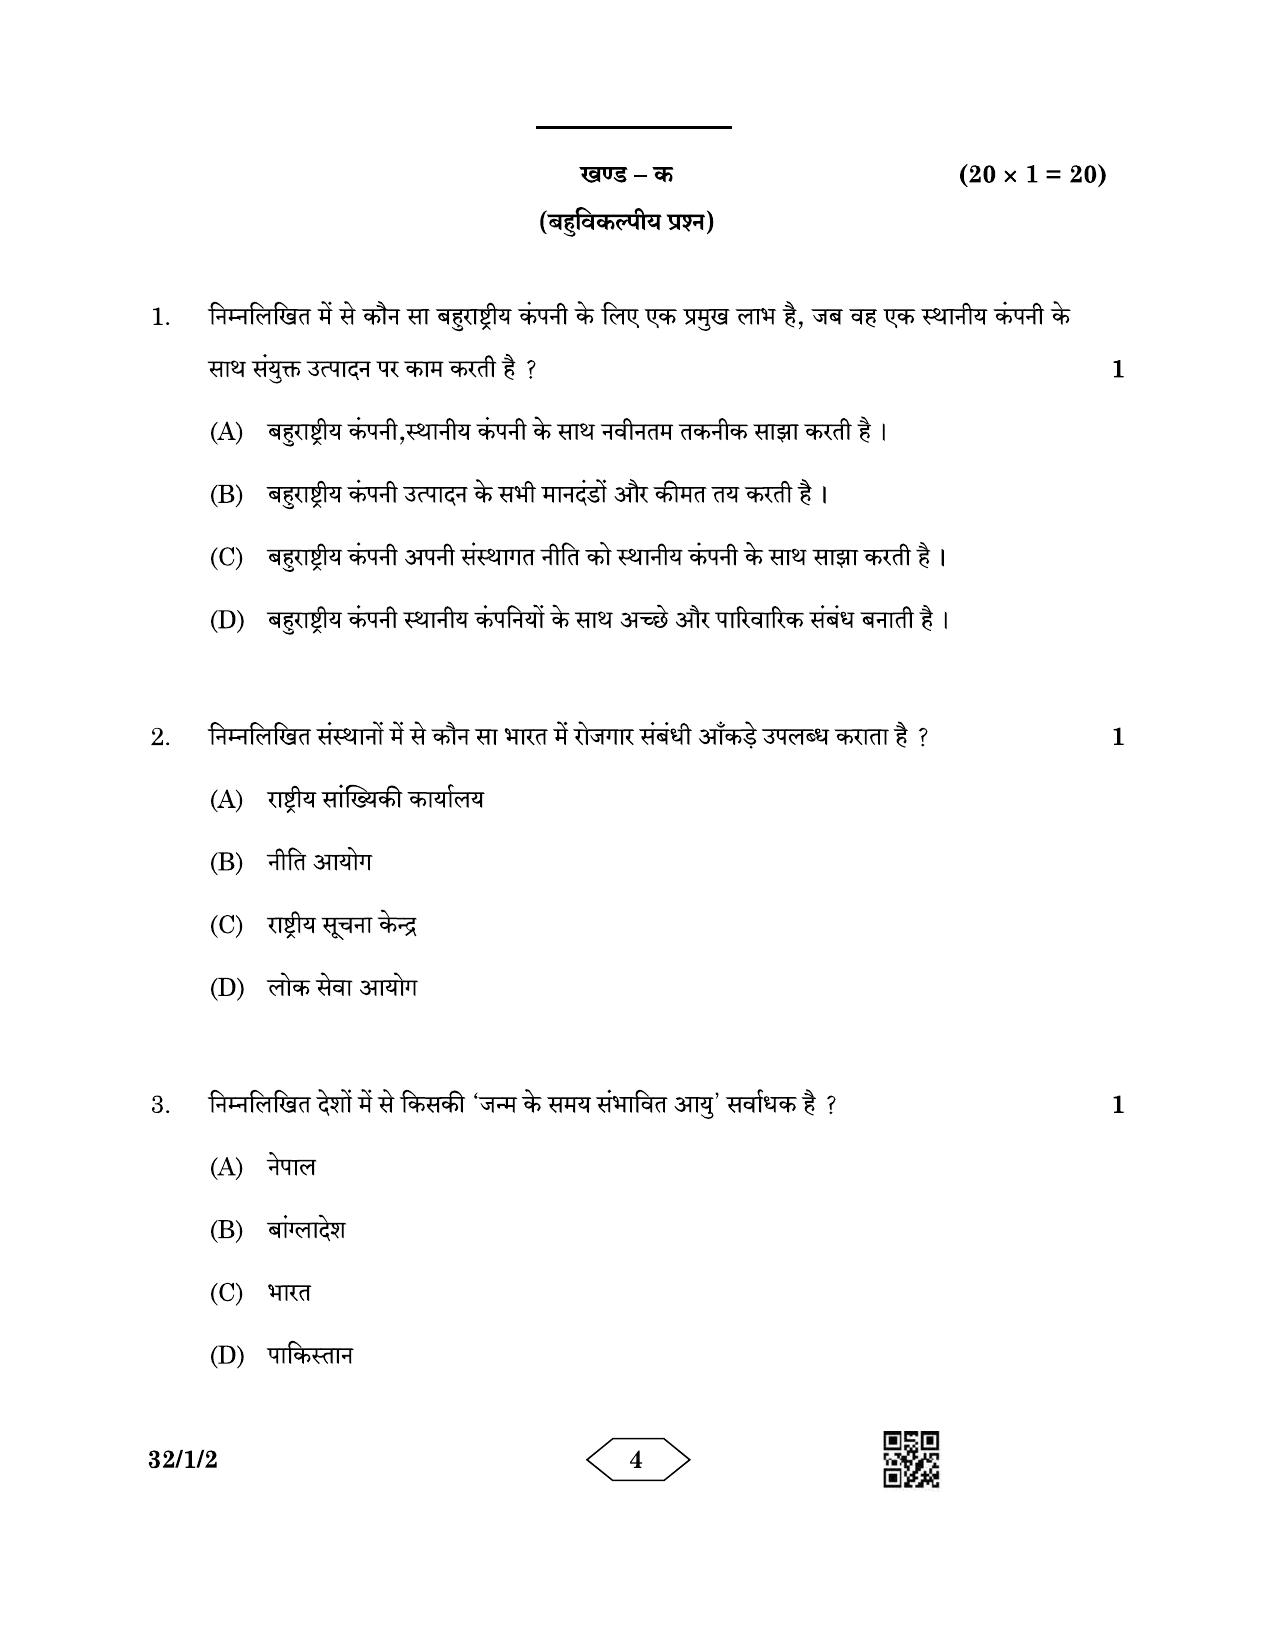 CBSE Class 10 32-1-2 Social Science 2023 Question Paper - Page 4